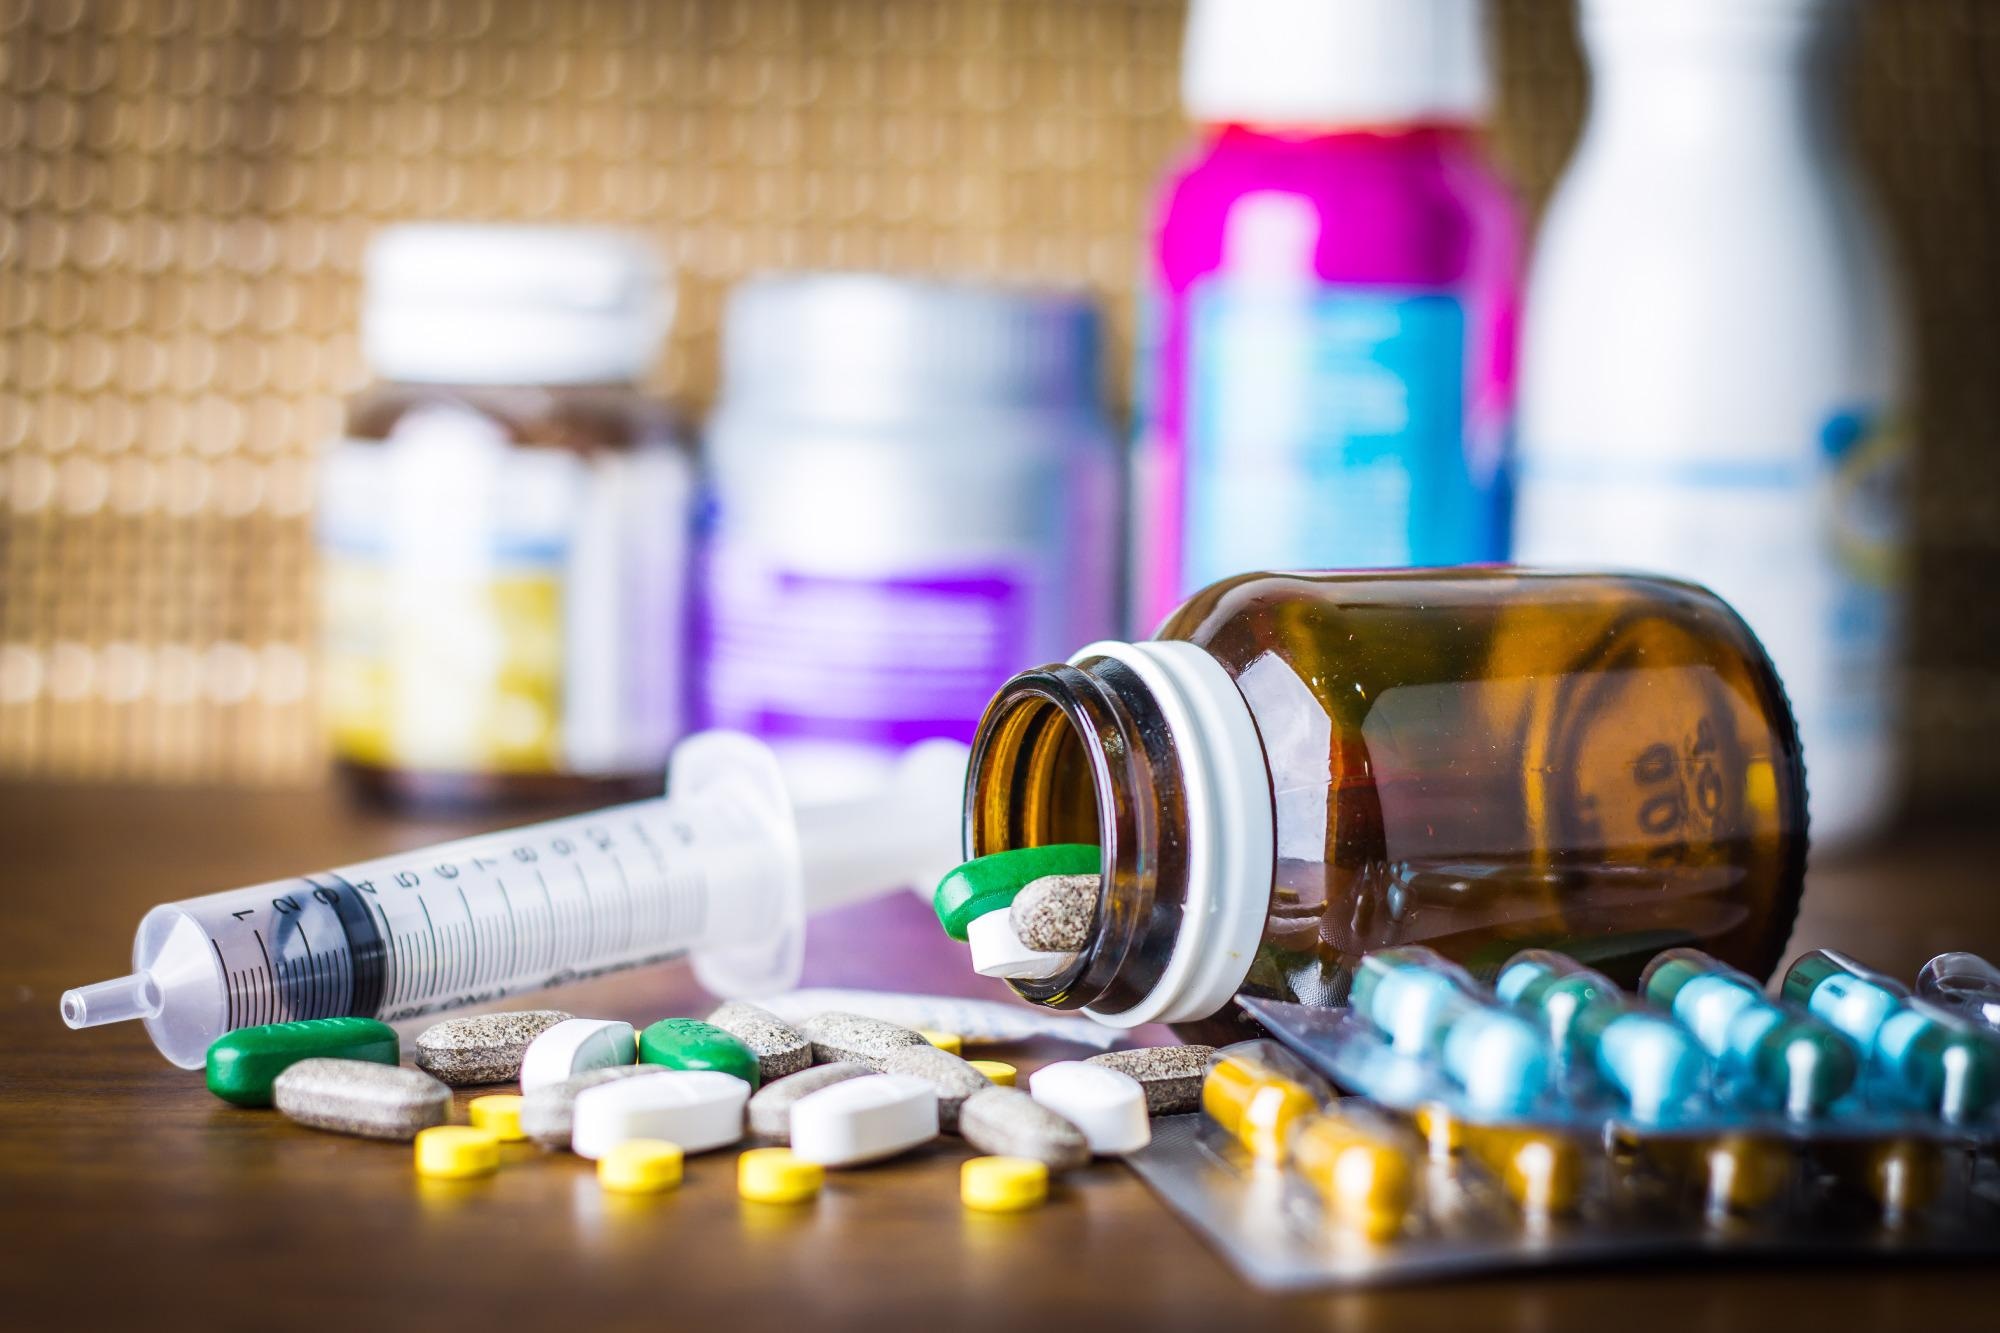 Study: Changes in English medication safety indicators throughout the COVID-19 pandemic: a federated analysis of 57 million patients’ primary care records in situ using OpenSAFELY. Image Credit: Adul10 / Shutterstock